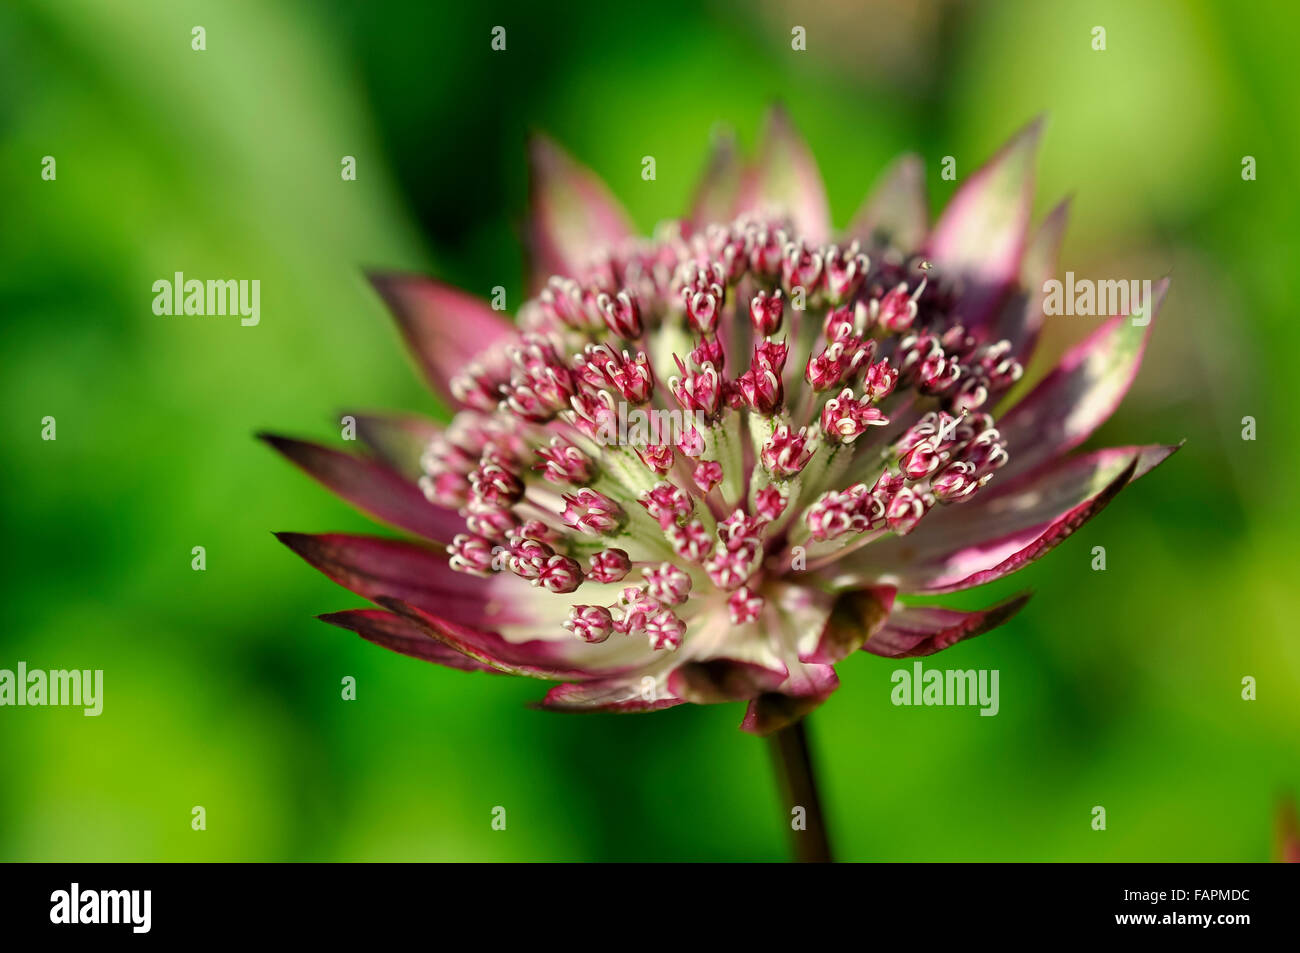 Deep red Astrantia flower in close up. Distinctive pincushion like flower with a ruff of red bracts. Stock Photo